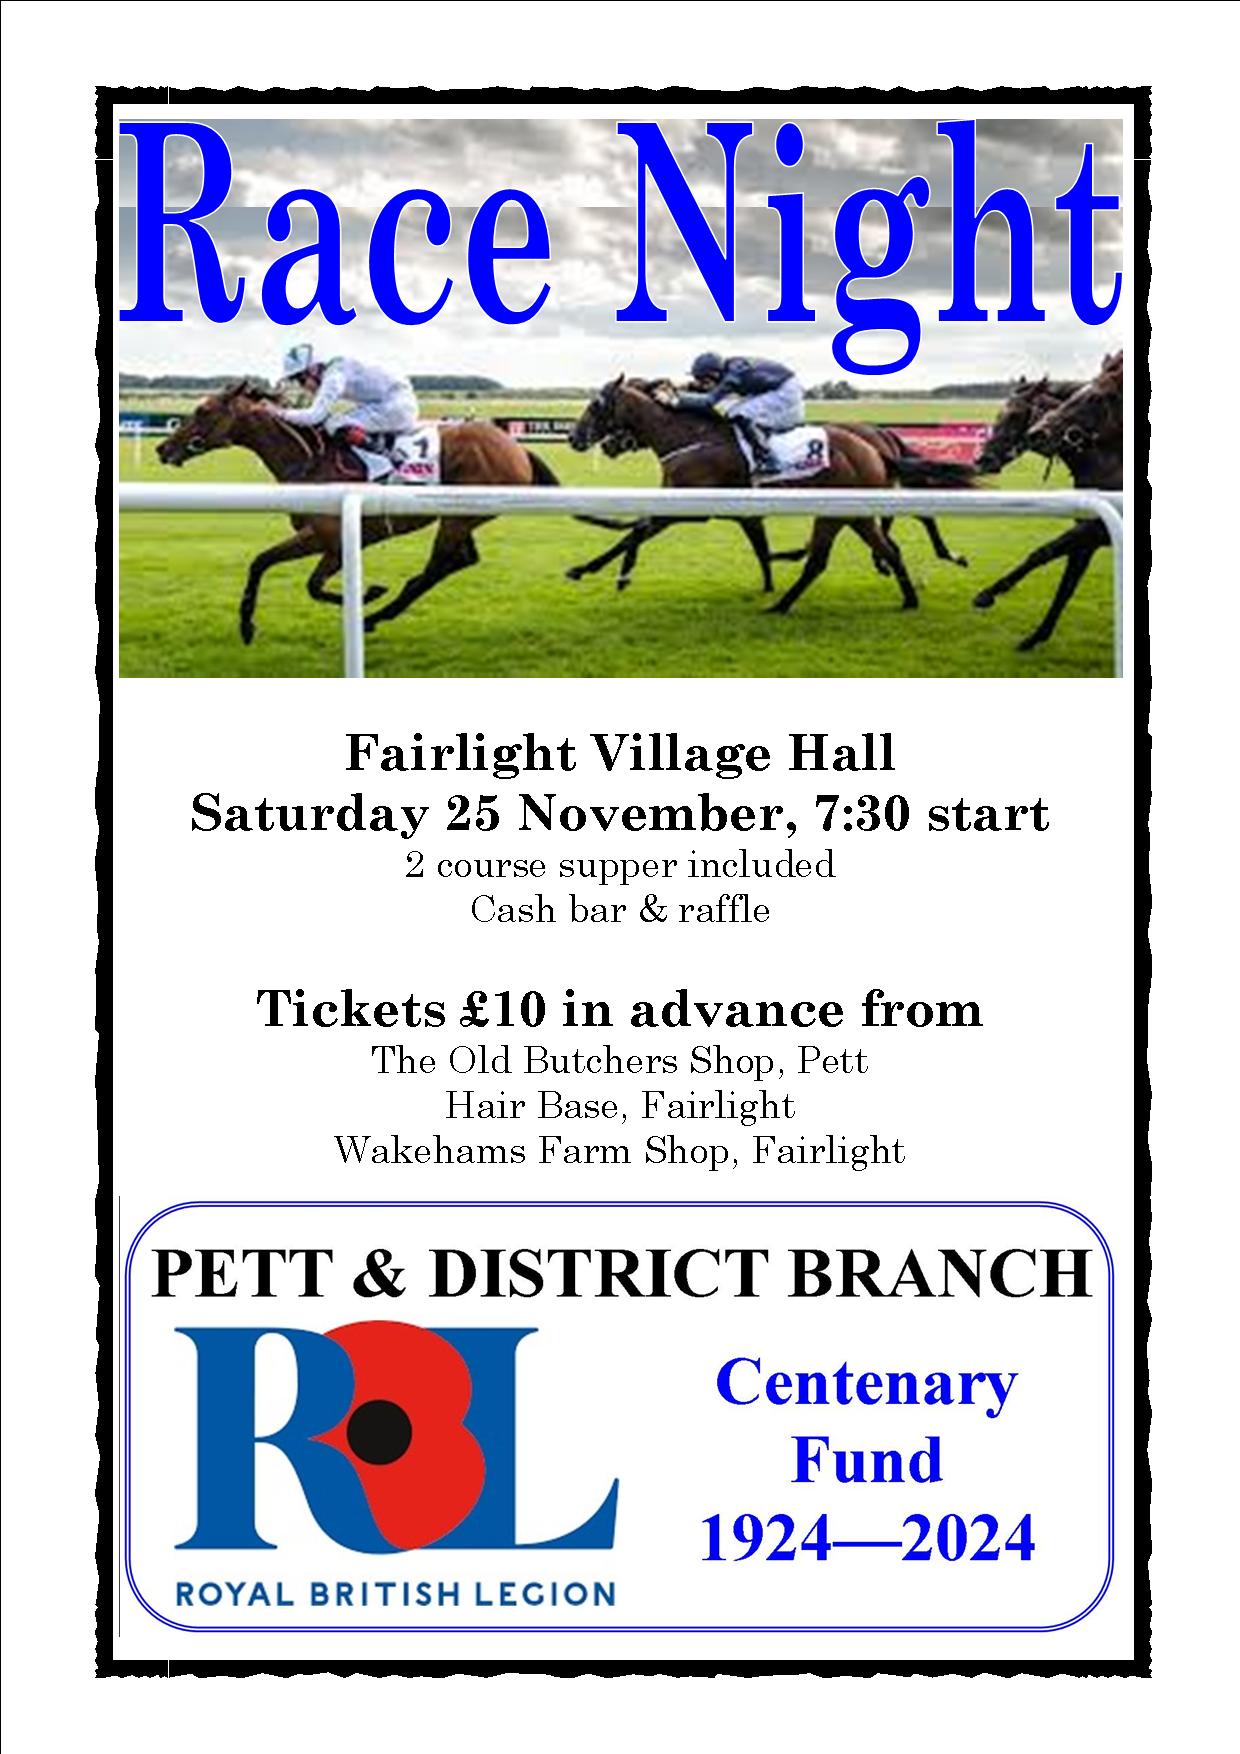 Race Night including 2 course supper Saturday 25th November Fairlight Village Hall tickets £10 in advance only